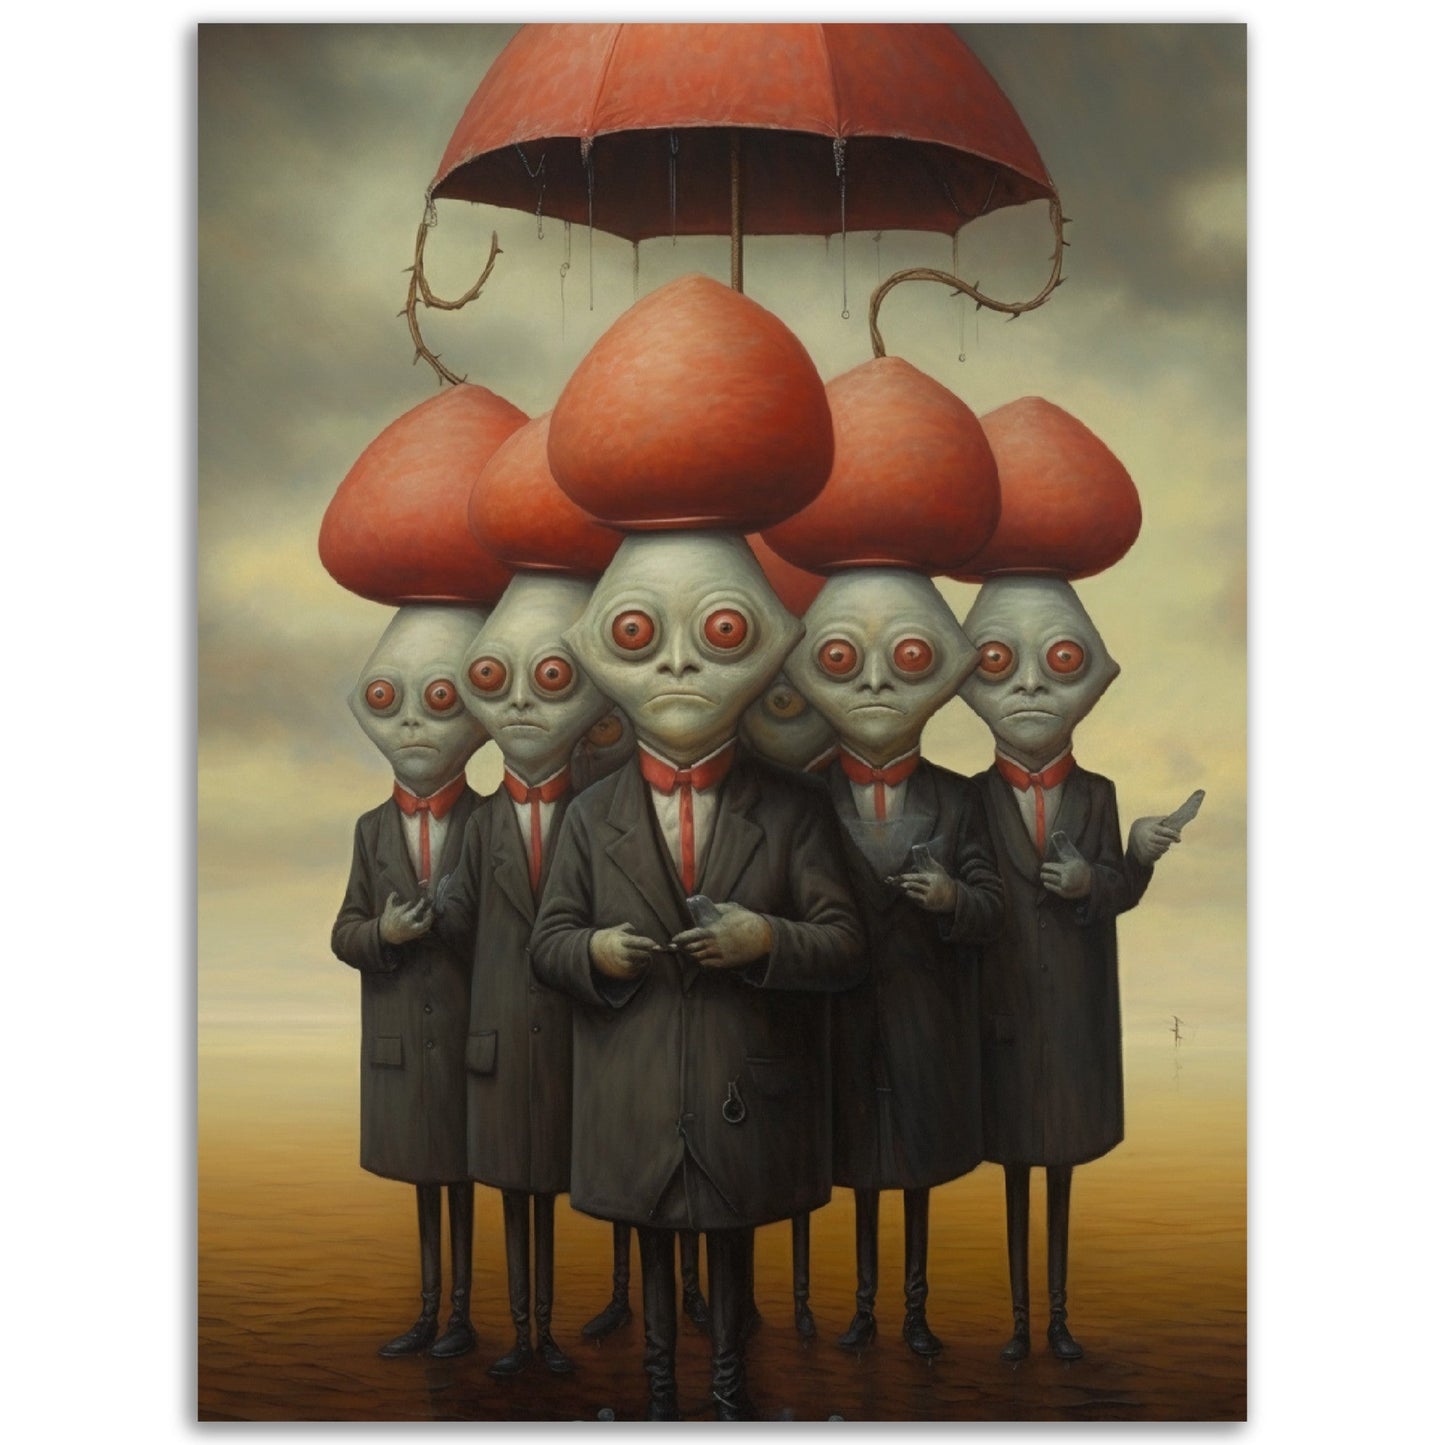 Alien Dignitary Group 2: A stunning piece of wall art that showcases a group of aliens gracefully holding umbrellas.